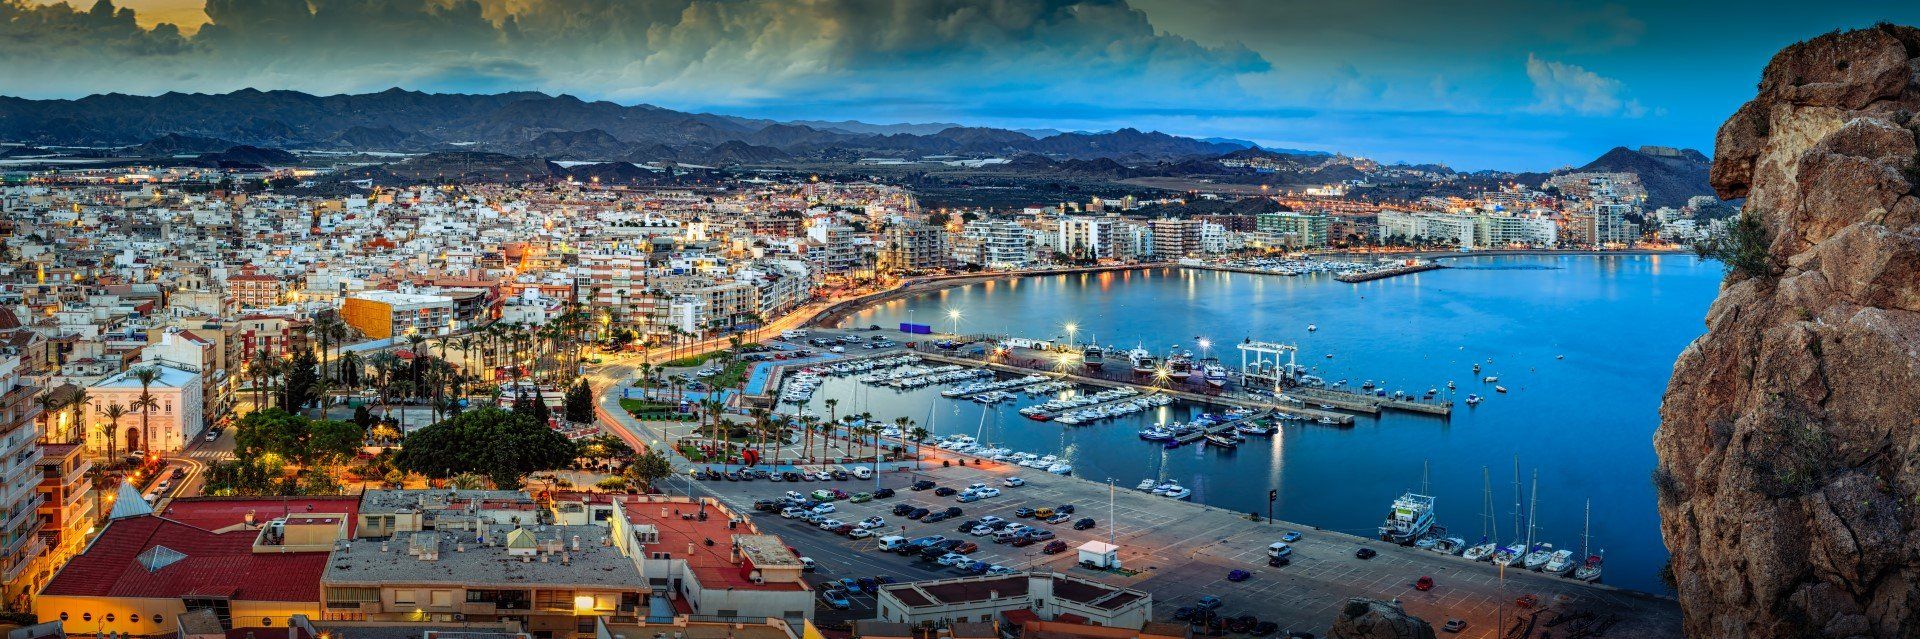 Explore the beaches, history and the authentic Spanish charm of the port city of Aguilas